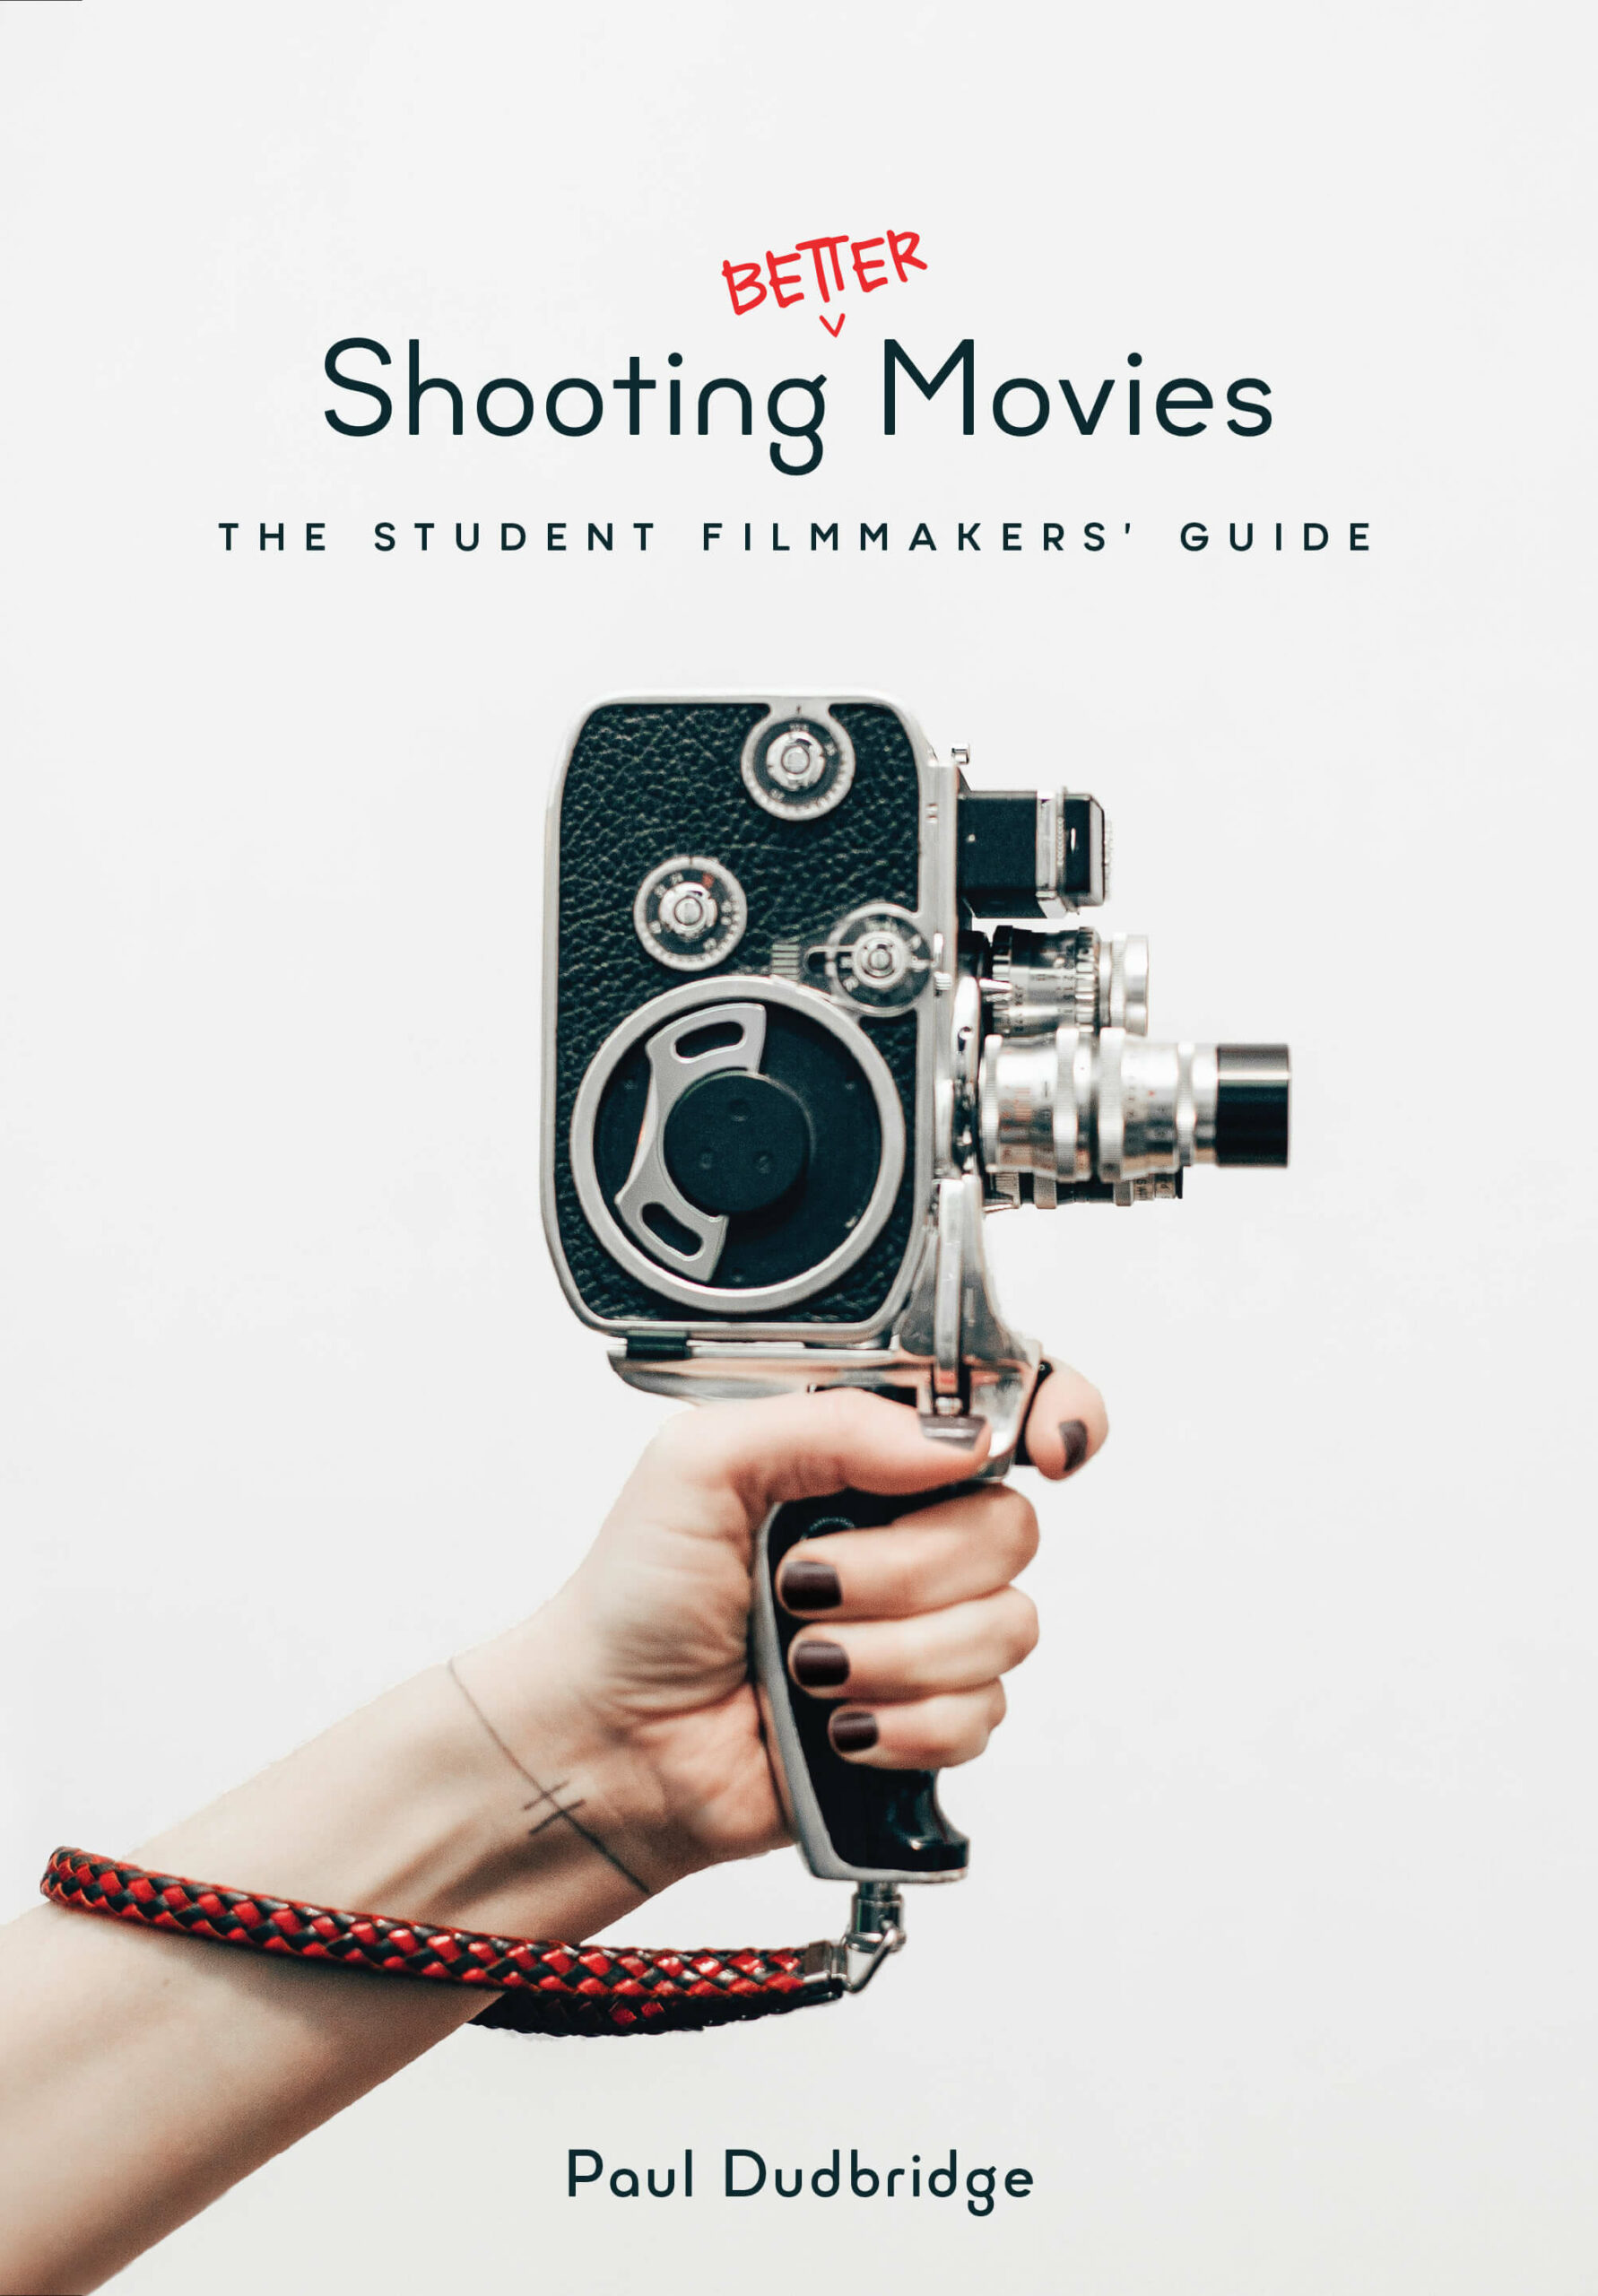 Shooting Better Movies: The Student Filmmakers’ Guide